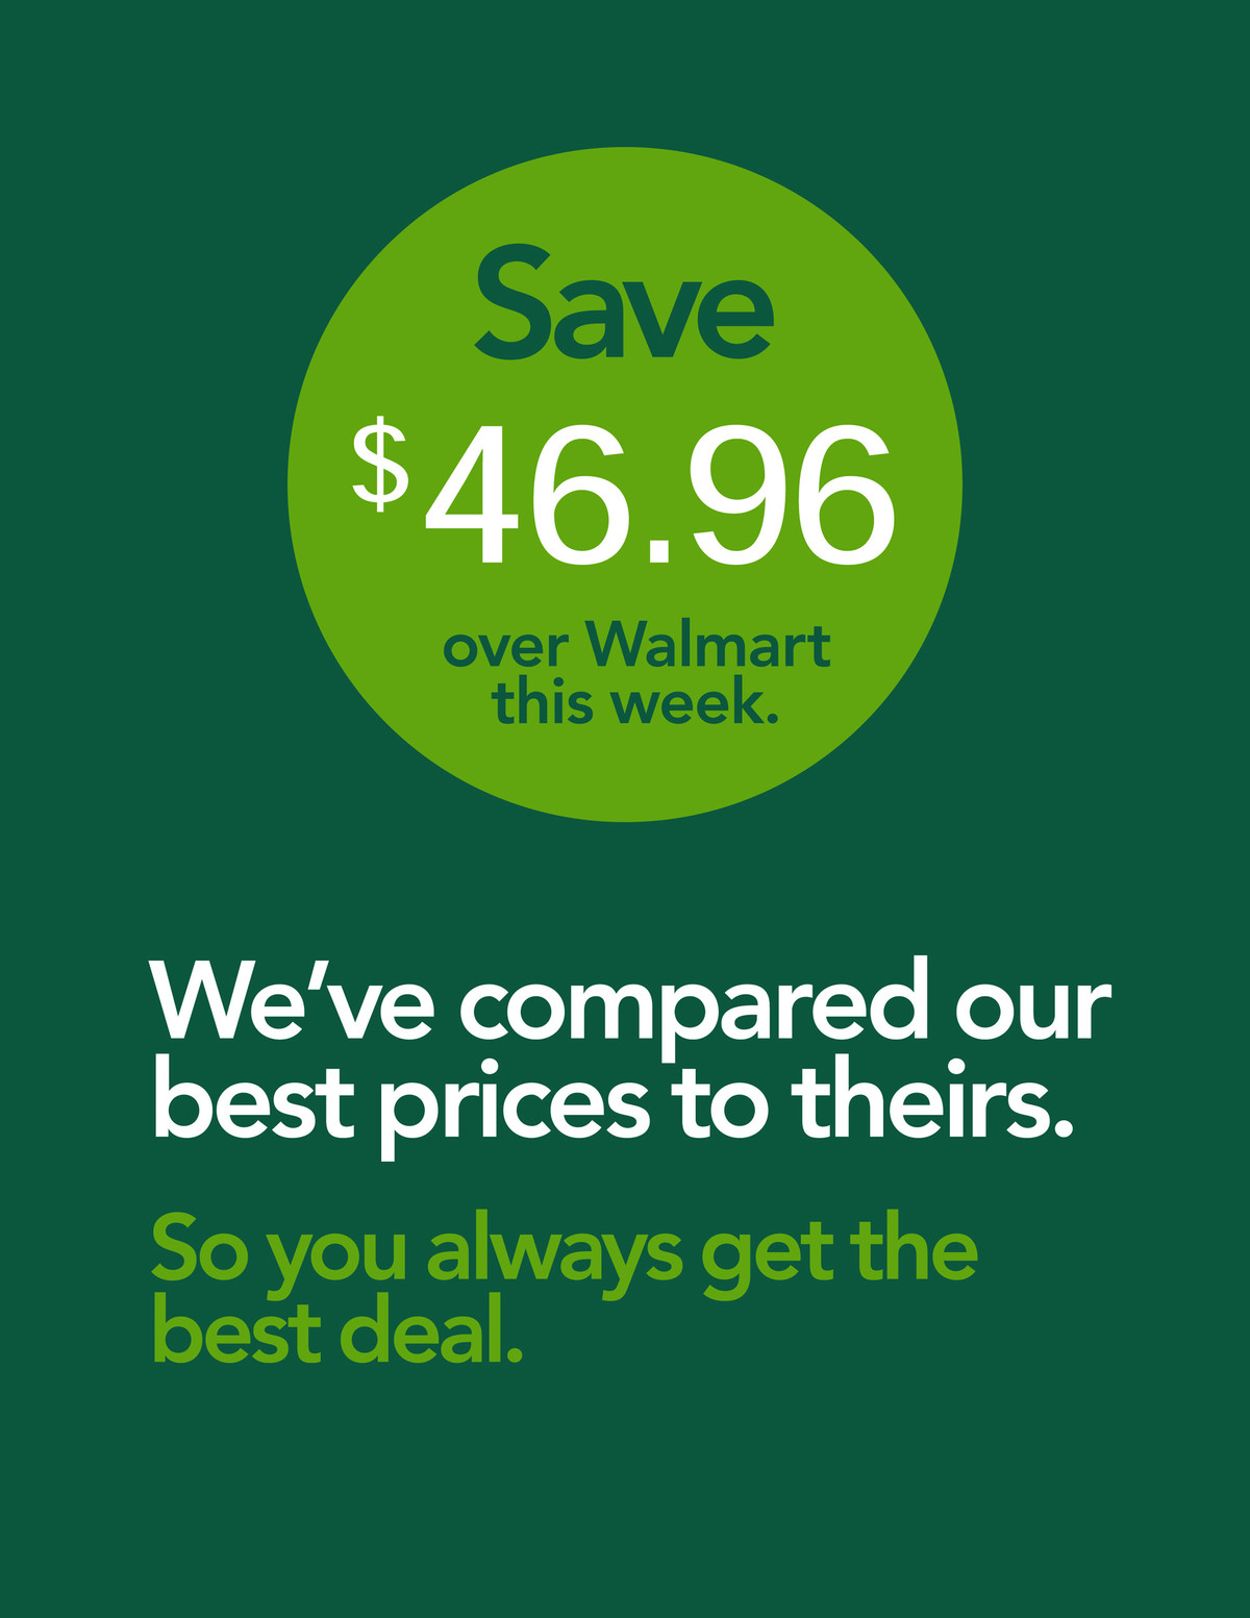 Publix Ad from 01/28/2021